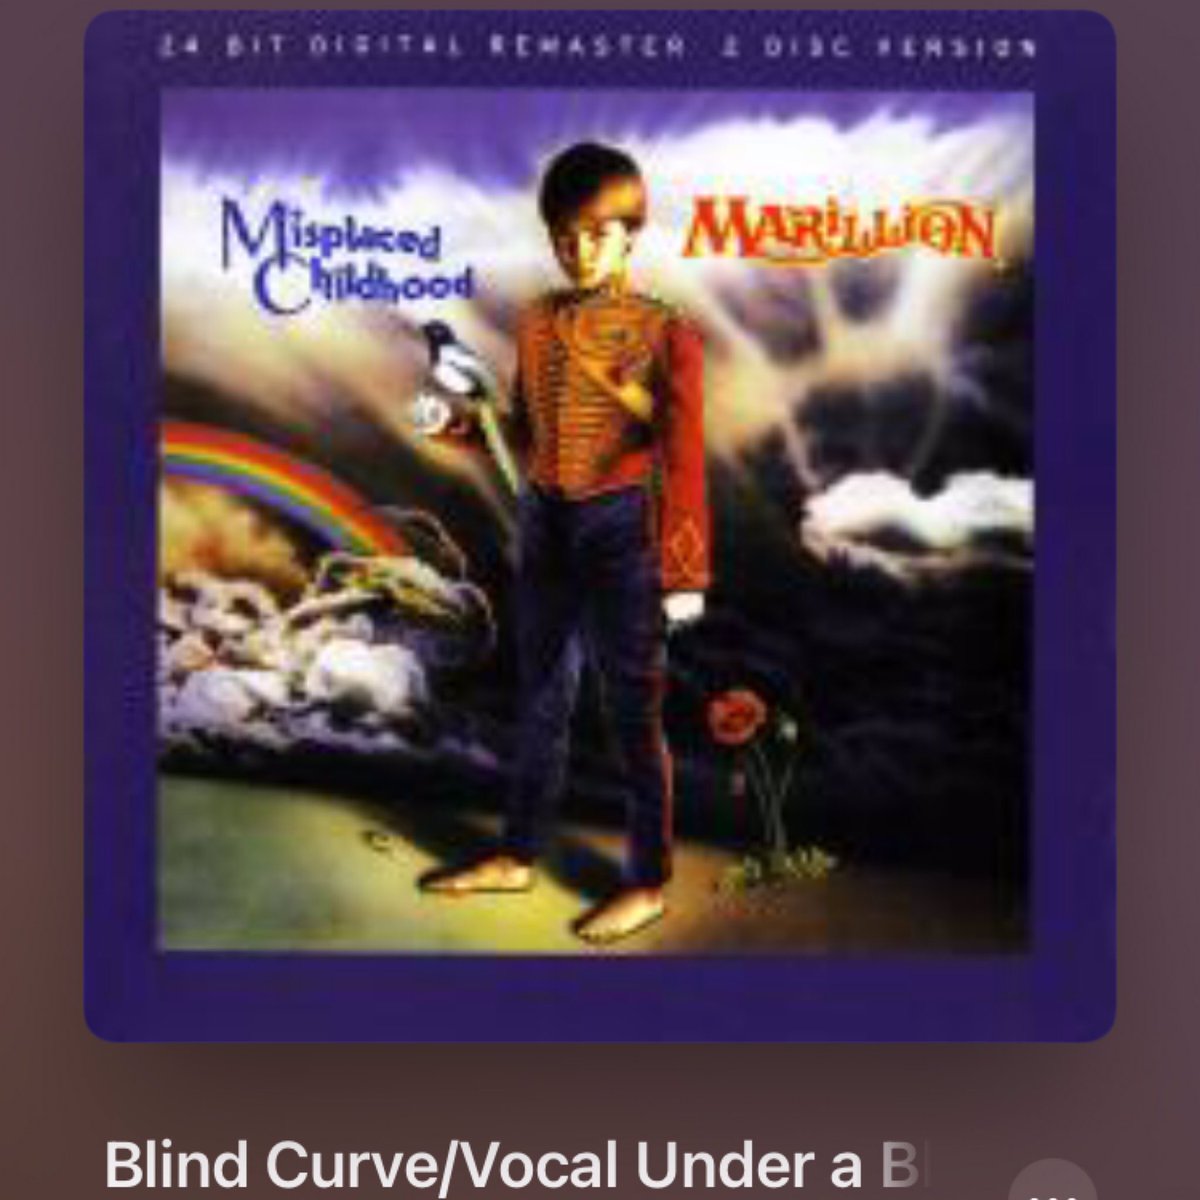 #NowPlaying
🎵 Blind Curve/Vocal Under a Bloodkight/Pssing ...
by 🎵 Marillion
from 🎵 Misplaced Childhood [Bonus CD] Disc 1
#DerekWilliamDick #IanMosley #MarkKelly #PeteTrewavas #SteveRothery #80s #過ち色の記憶 #pomprock